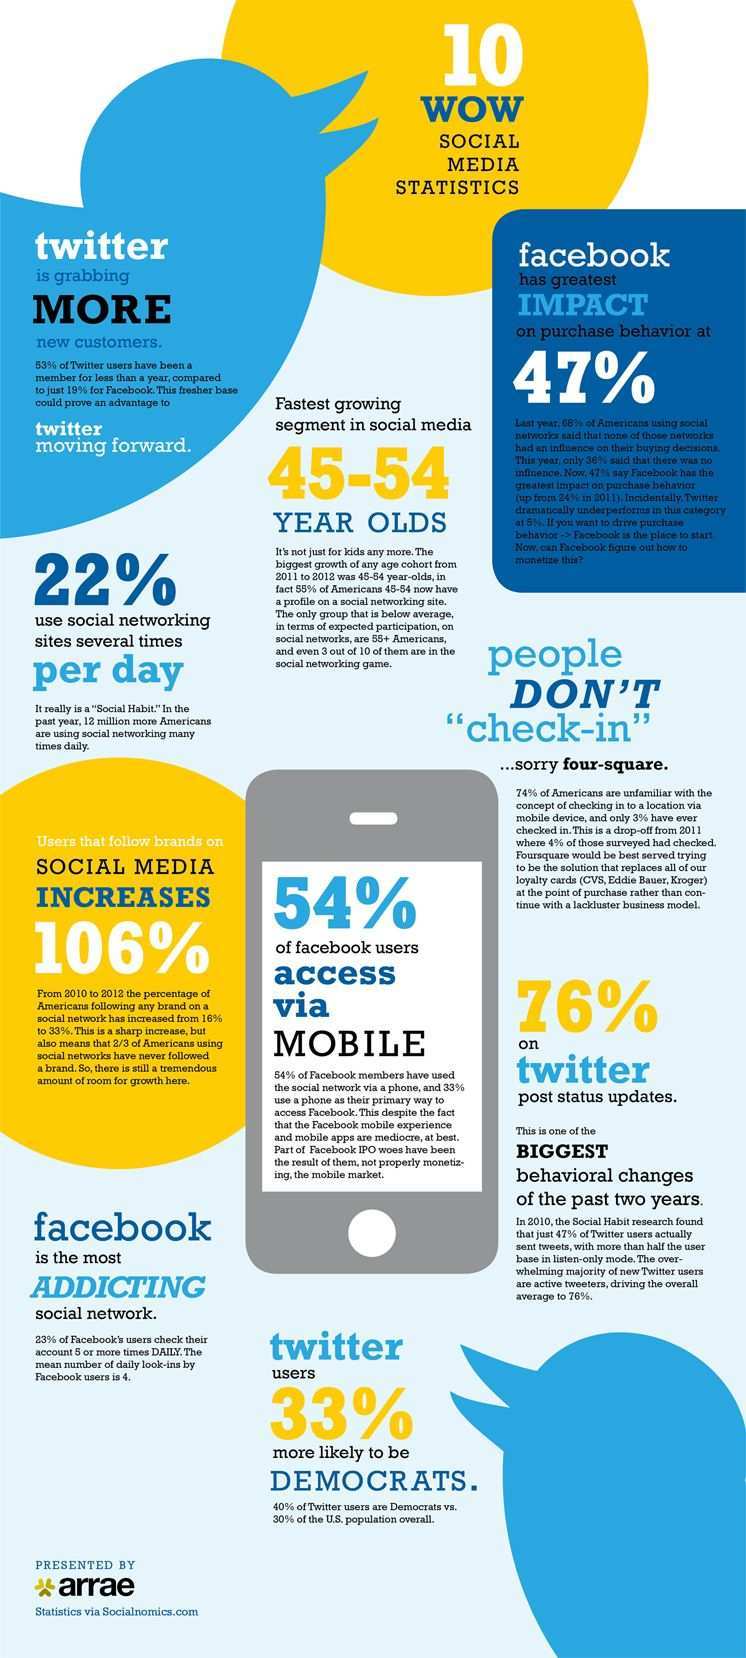 10 Wow Social Media Stats Infographic Social Media Infographic Social Media Statistics Social Media Trends